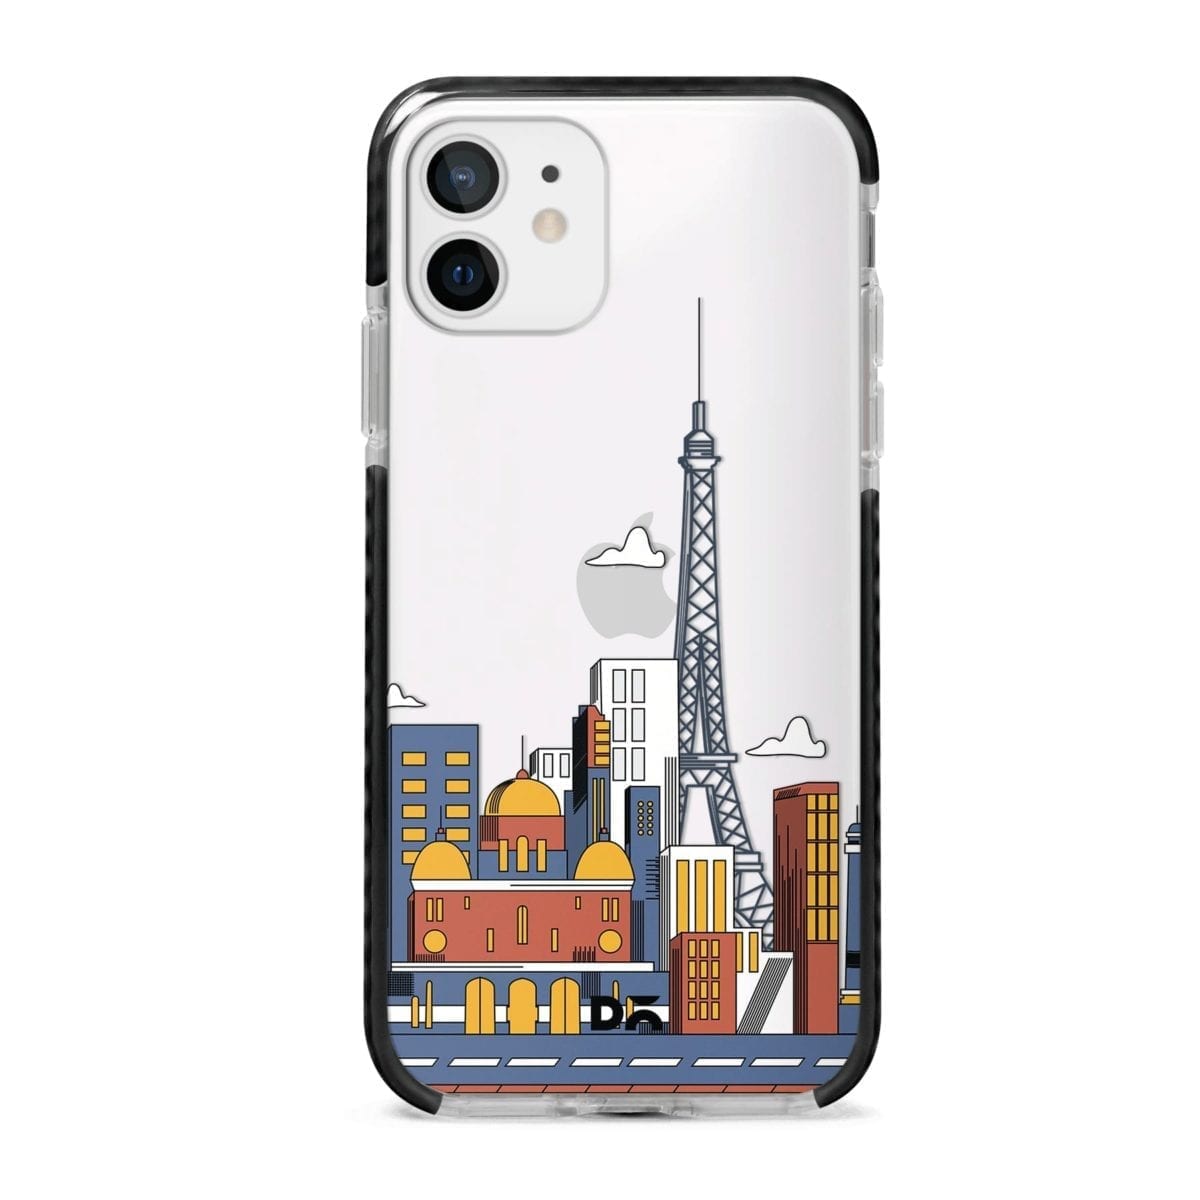 Paris Skyline Clear Stride Case Cover for Apple iPhone 12 Mini and Apple iPhone 12 with great design and shock proof | Klippik | Online Shopping | Kuwait UAE Saudi